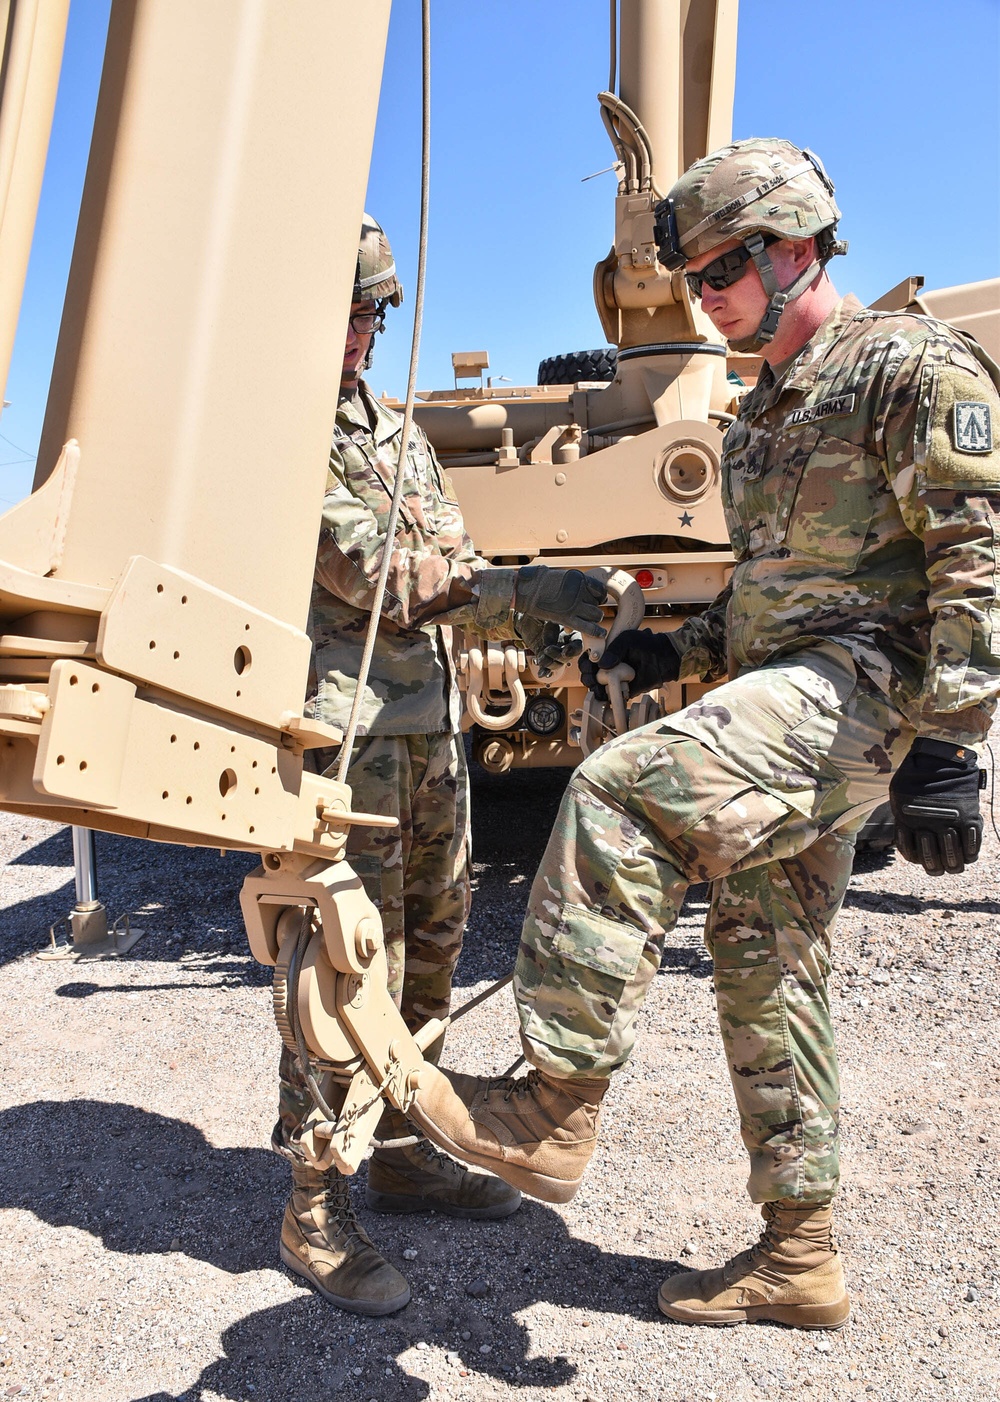 Transporting lethality - New crane increases readiness